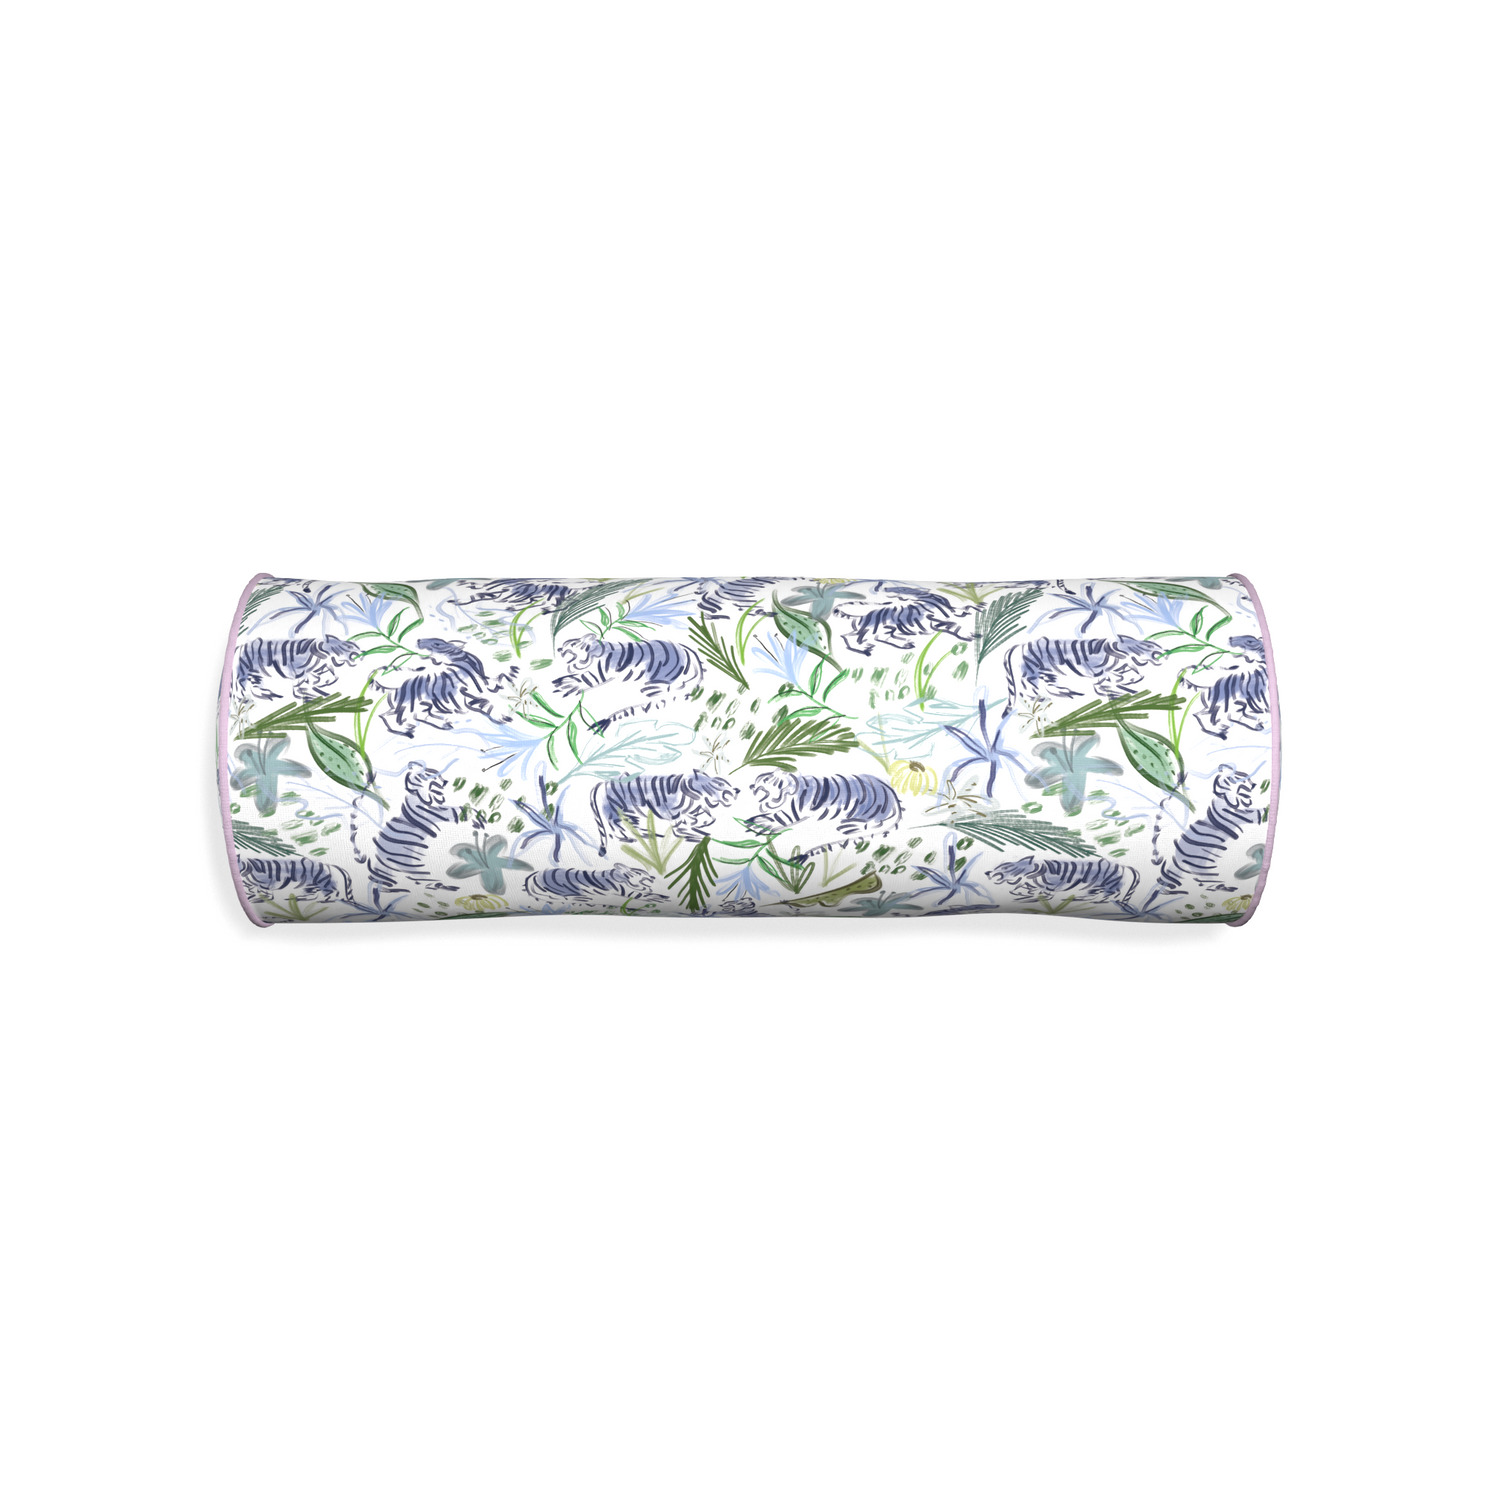 Bolster frida green custom green tigerpillow with l piping on white background